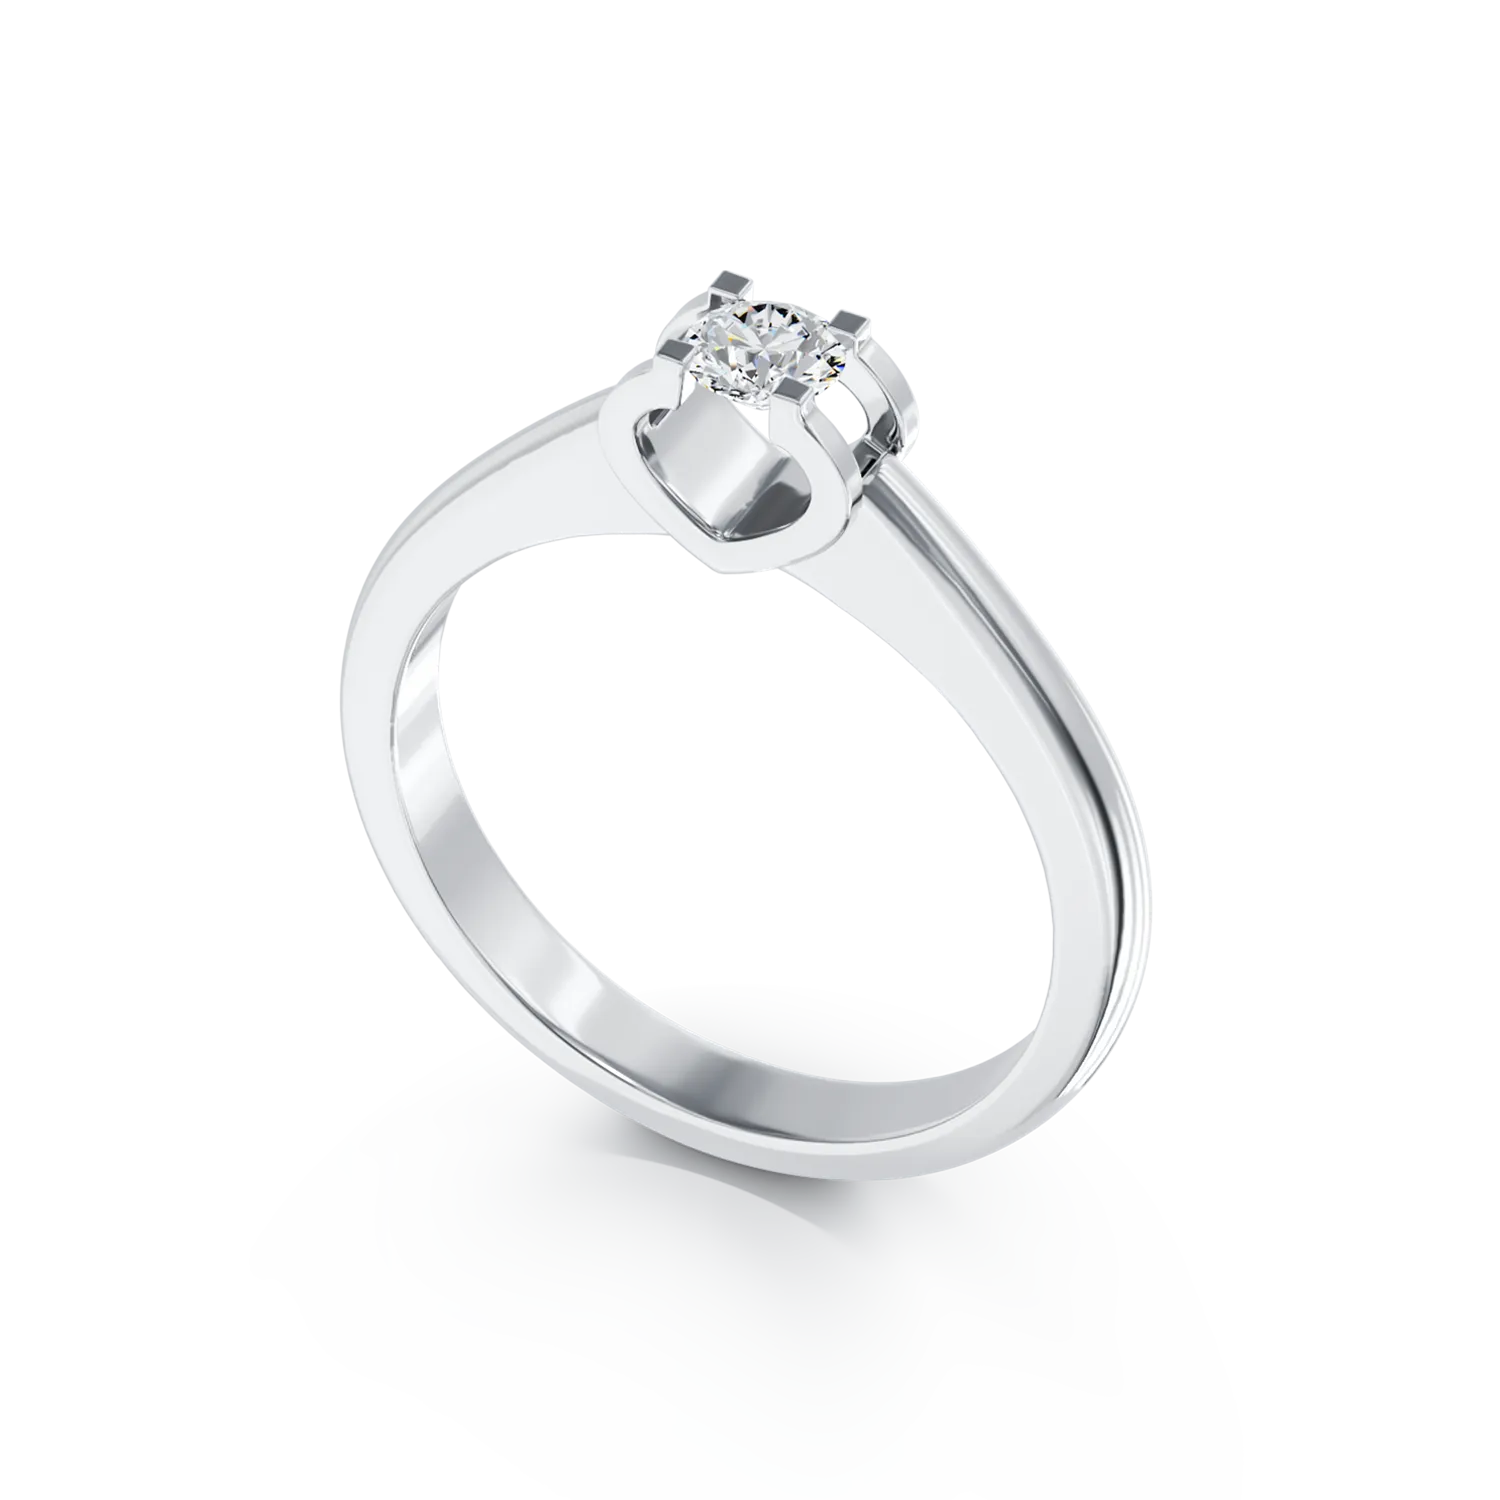 18K white gold engagement ring with 0.21ct solitaire diamond